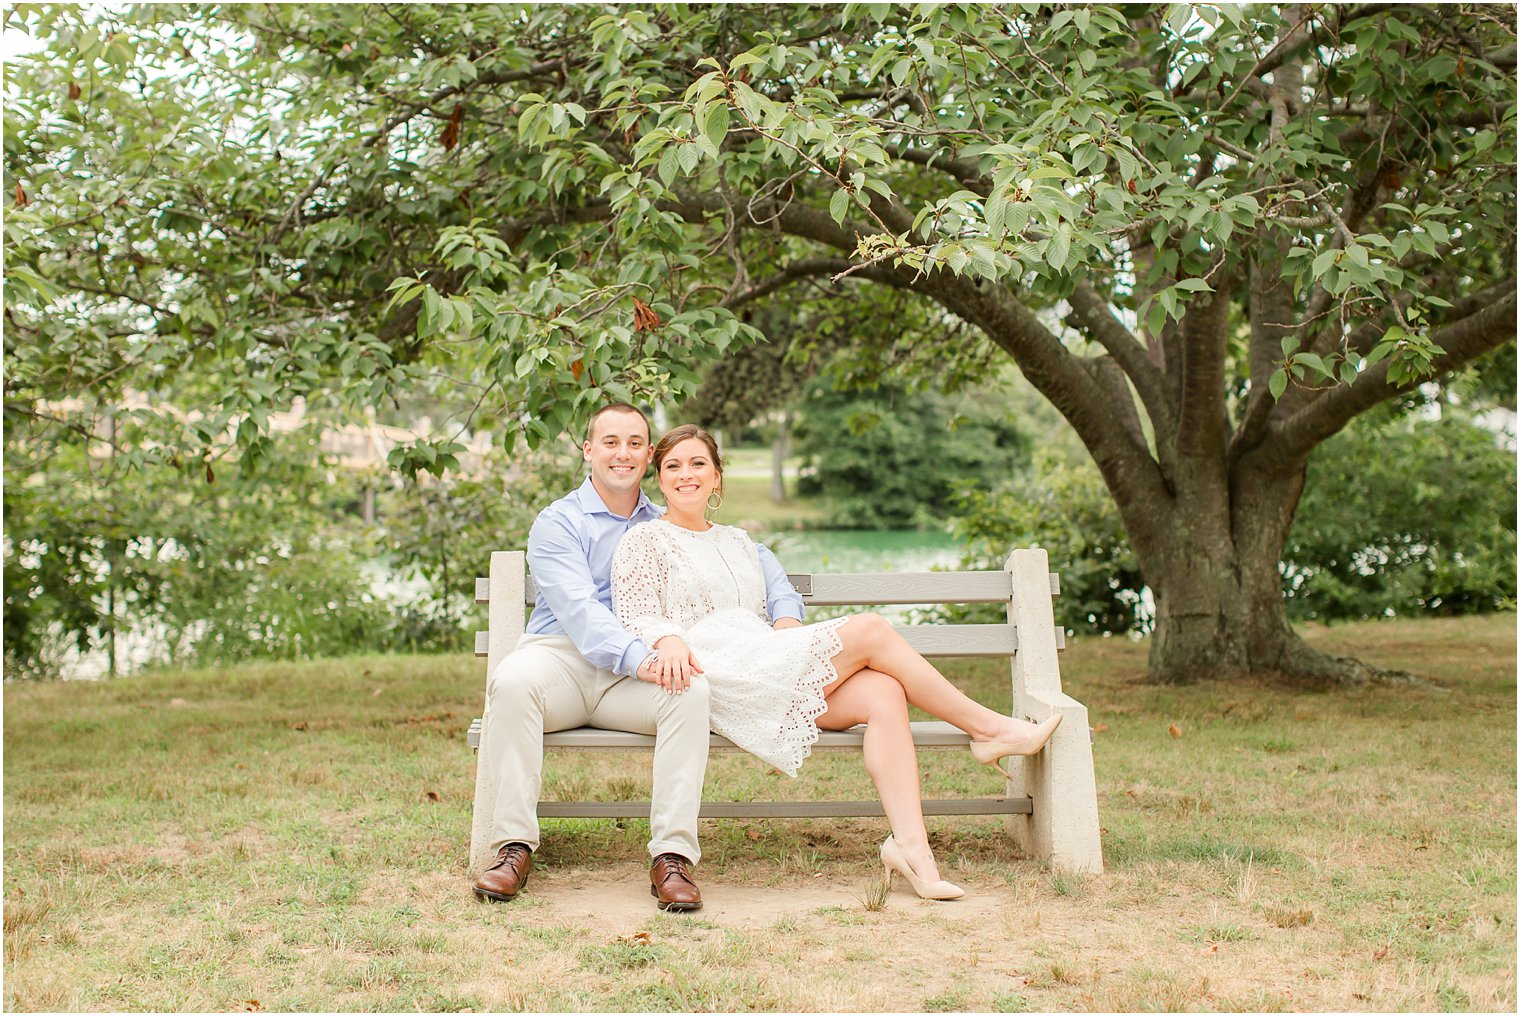 Light and airy engagement photographer